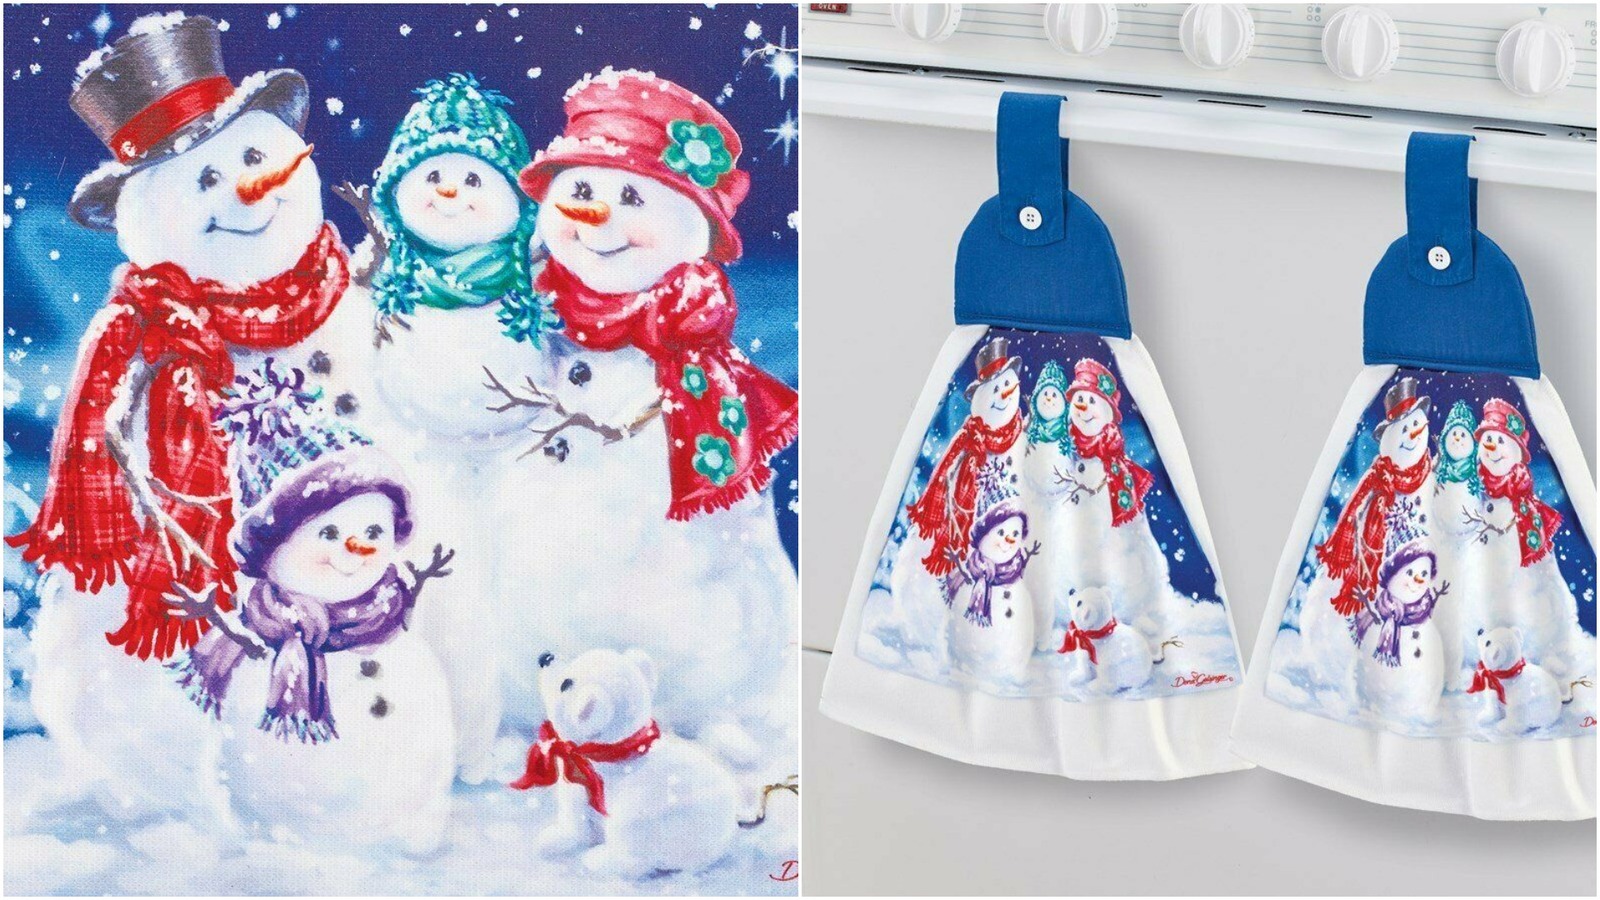 Set of 2 Snowman Family Christmas Kitchen Appliance Towels - Holiday Gift